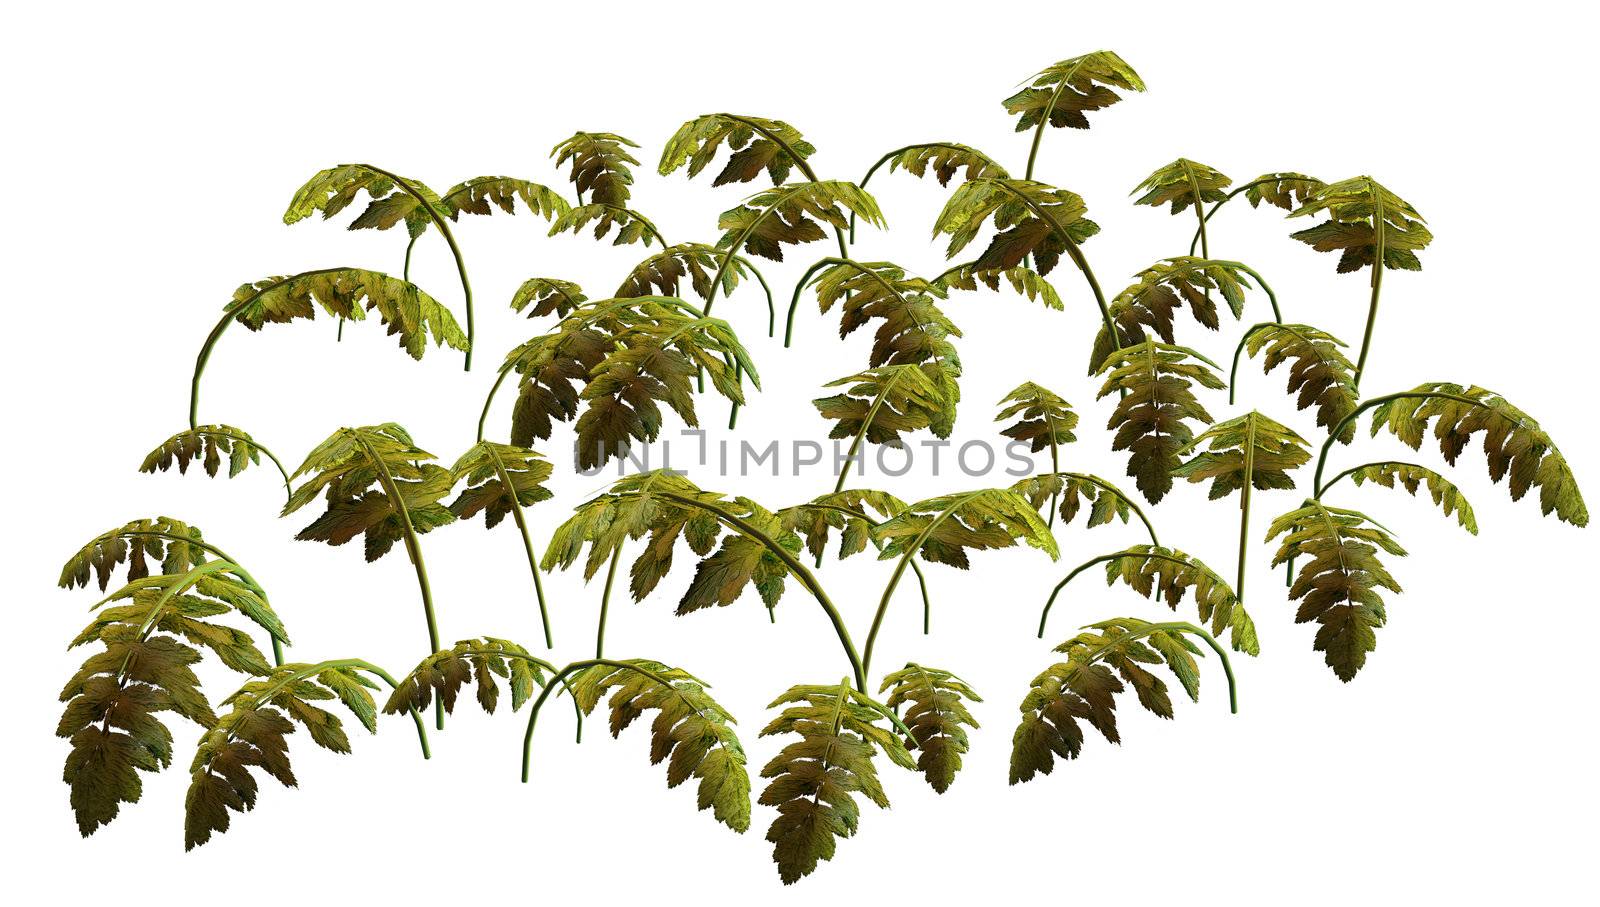 Green jungle plant on a white background